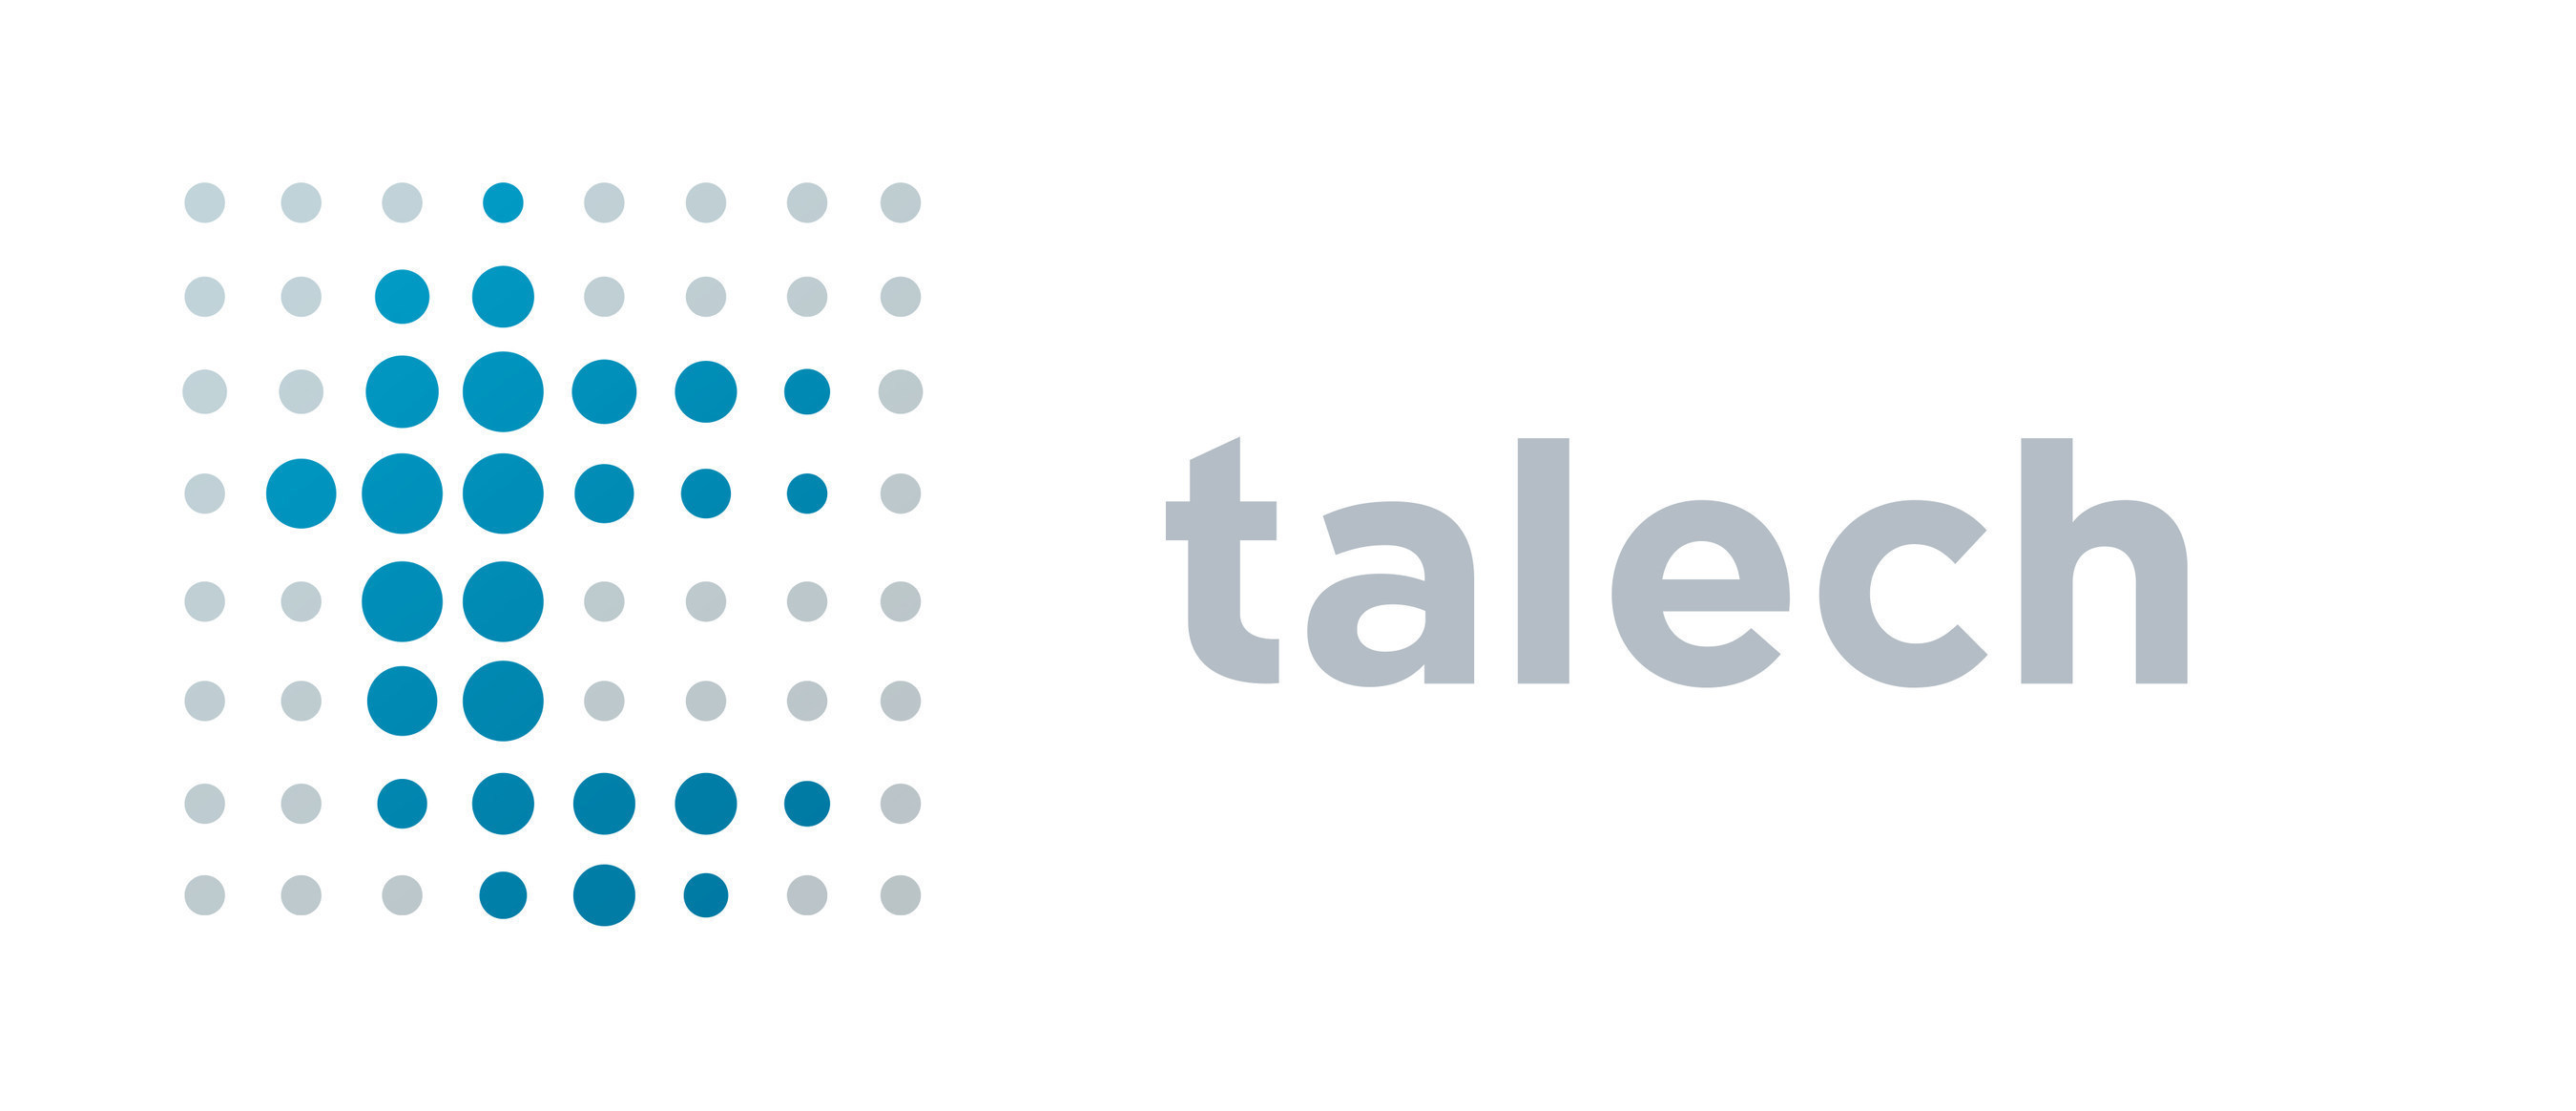 talech Inc. is an intuitive and intelligent cloud-based point of sale solution designed to optimize and grow small and medium-sized businesses.